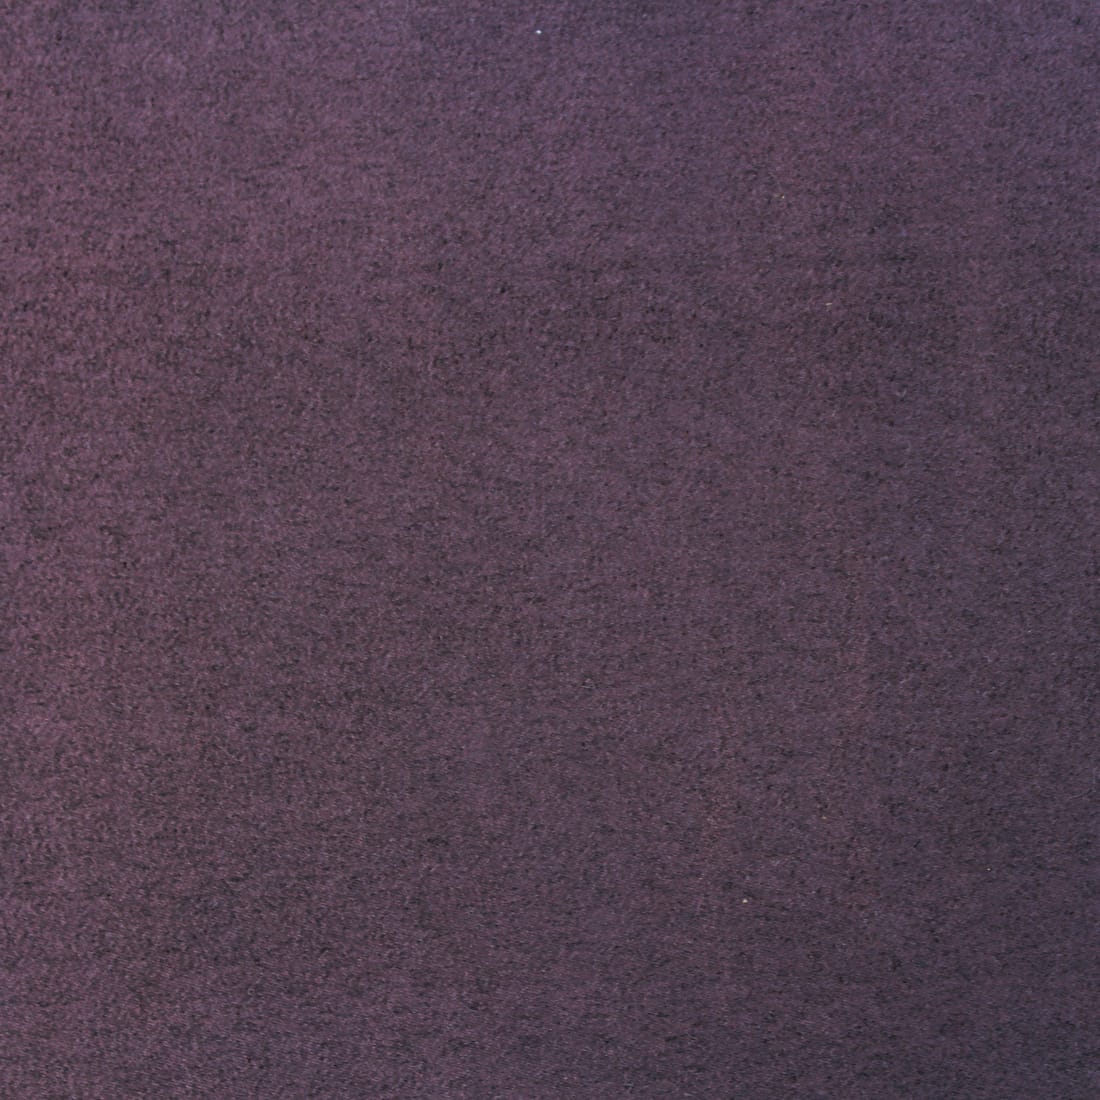 Imported SUEDE Solid Design 200 GSM Fabric 60" (152 cms) - Burgundy